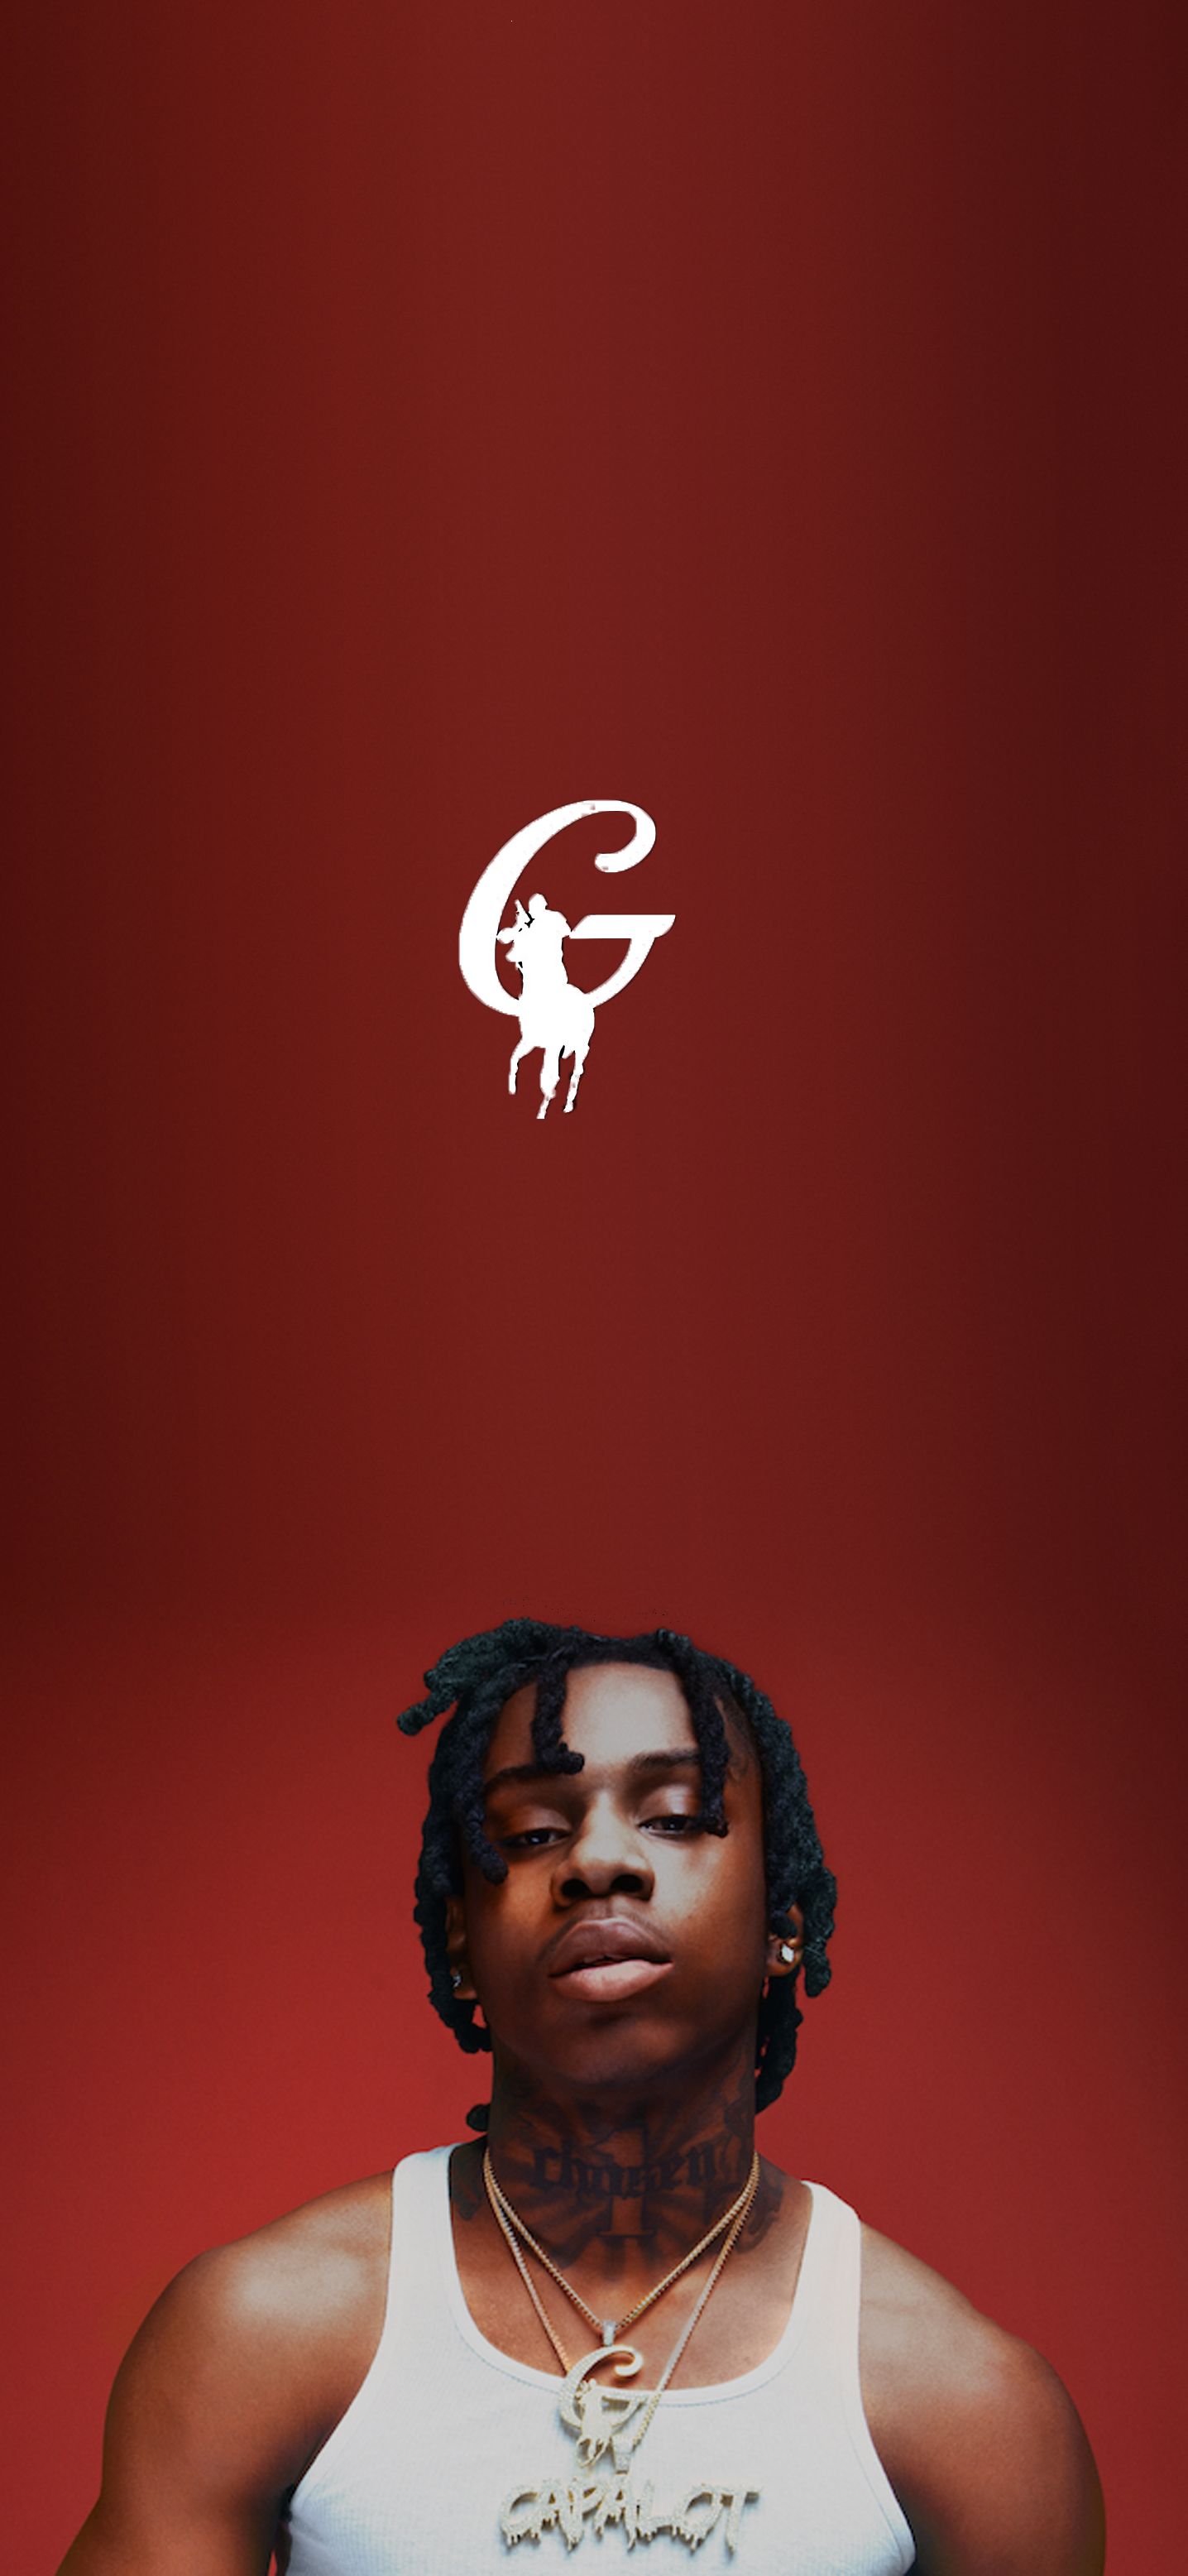 Polo G Anime Wallpapers - Wallpaper Cave